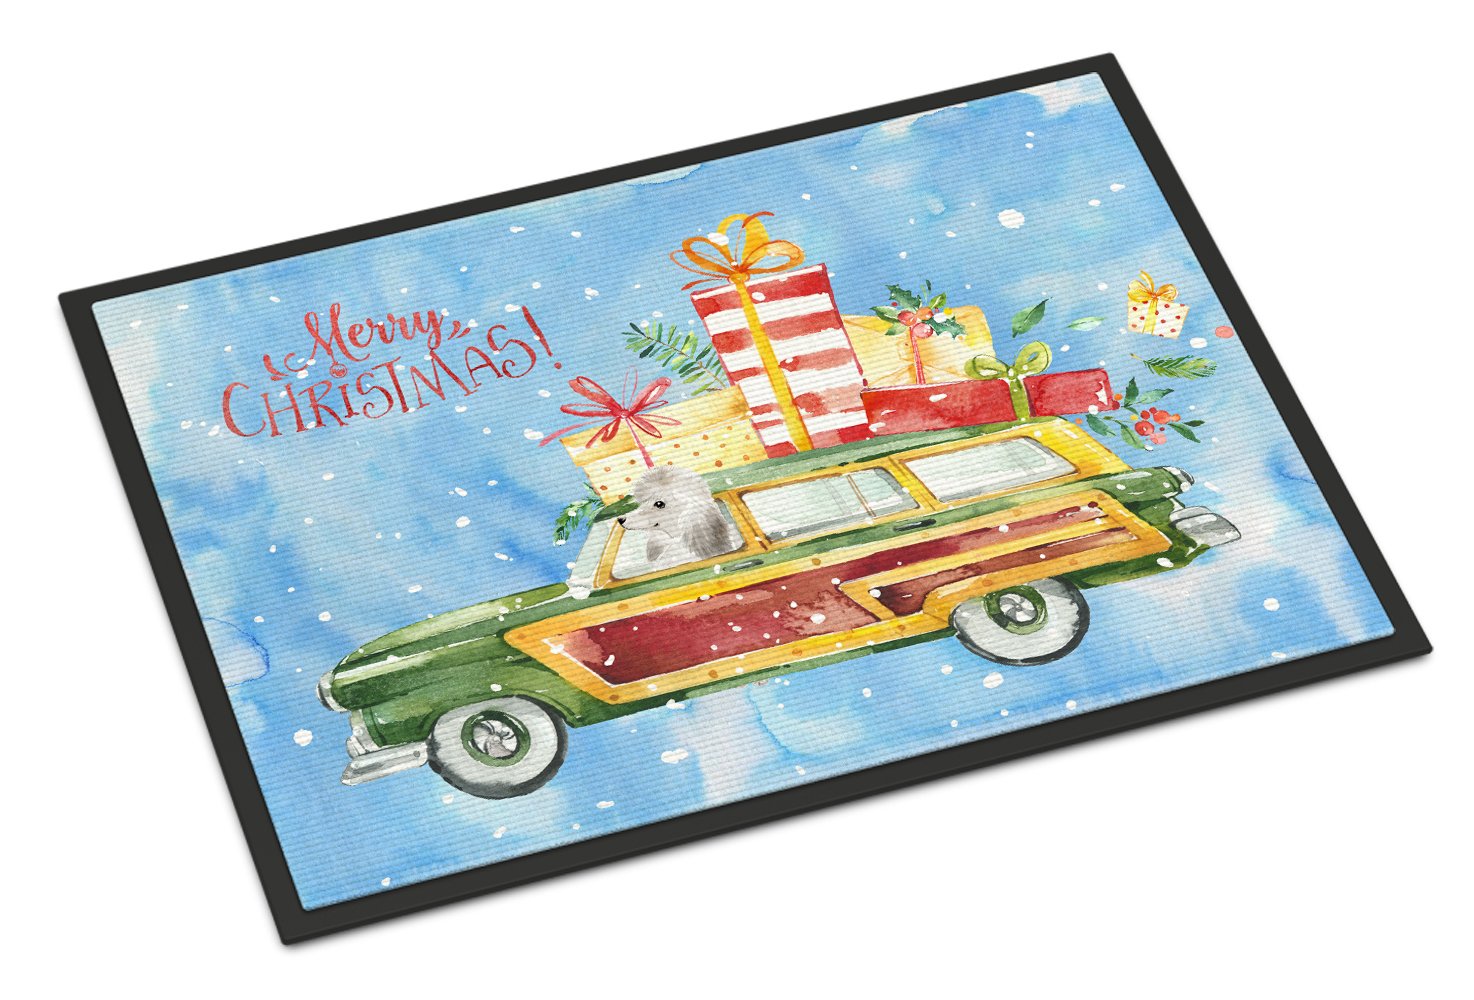 Merry Christmas White Poodle Indoor or Outdoor Mat 24x36 CK2466JMAT by Caroline's Treasures